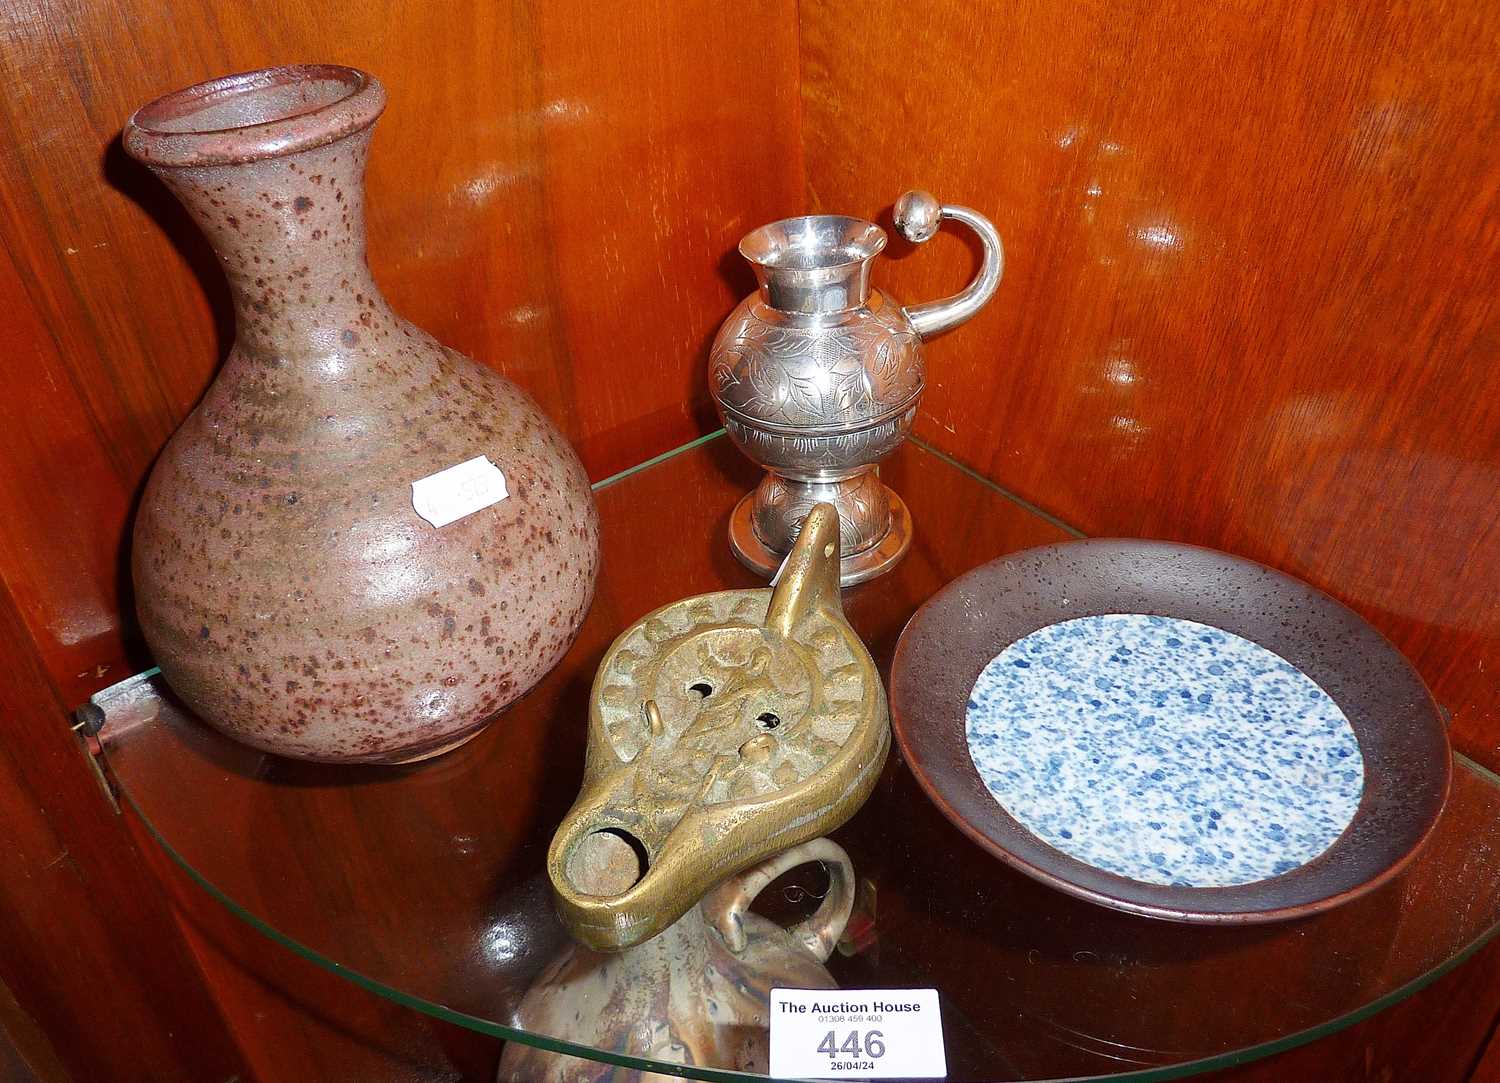 South American white metal or silver mate vessels, a Romanesque bronze spirit lamp, a Studio Pottery